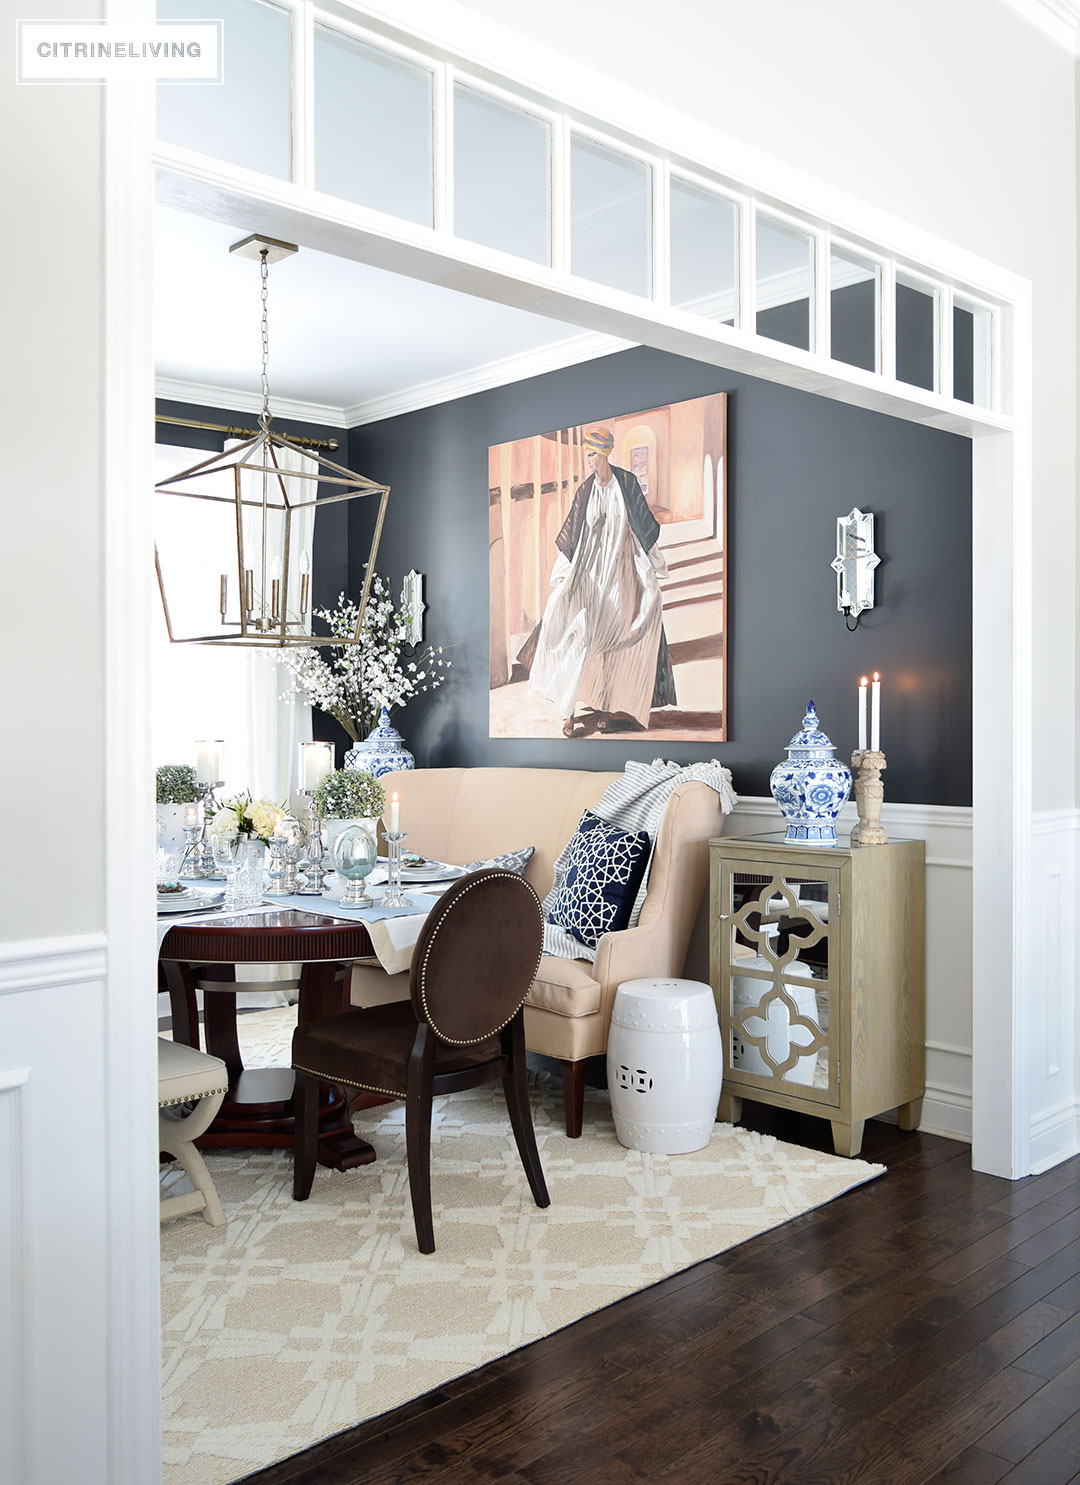 Elegant dining room with black walls and blue and white chinoiserie accents. White transoms add architectural interest. A simple Easter or Spring tablescape with metallic accents adds sophistication.